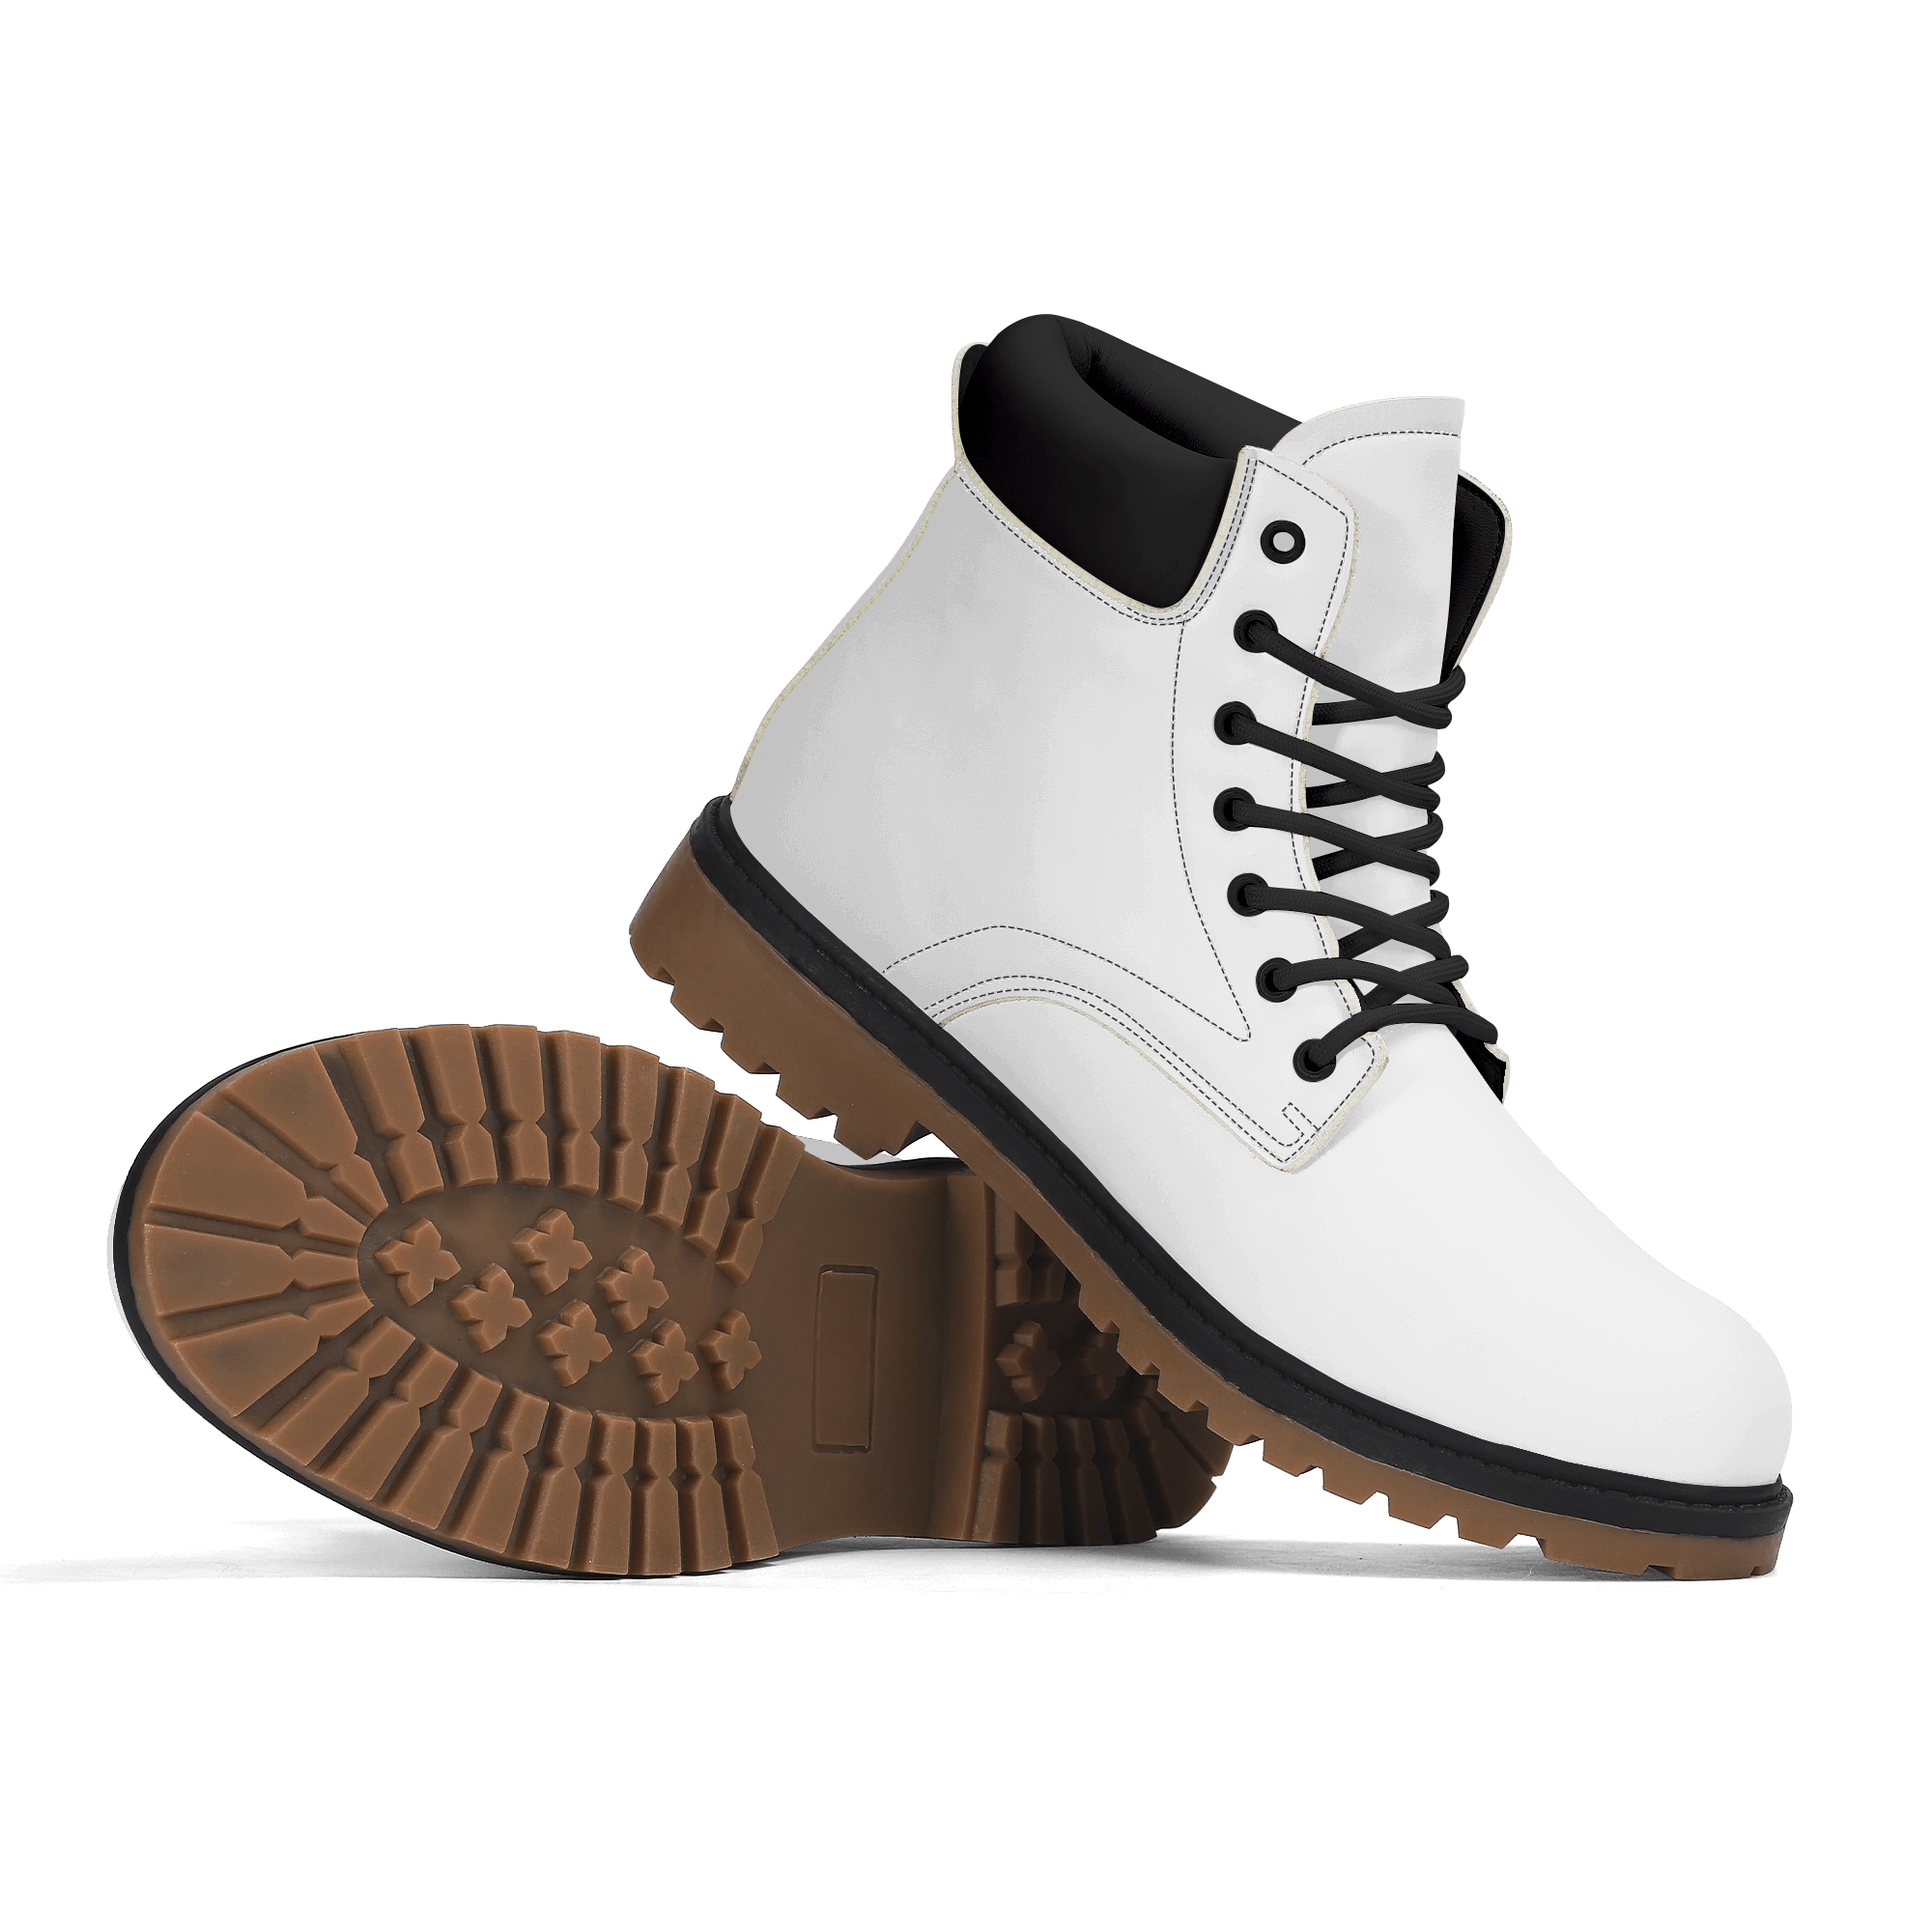 Customizable Vegan Leather Boots (Brown Outsole) - Design Your Own | Shoe Zero